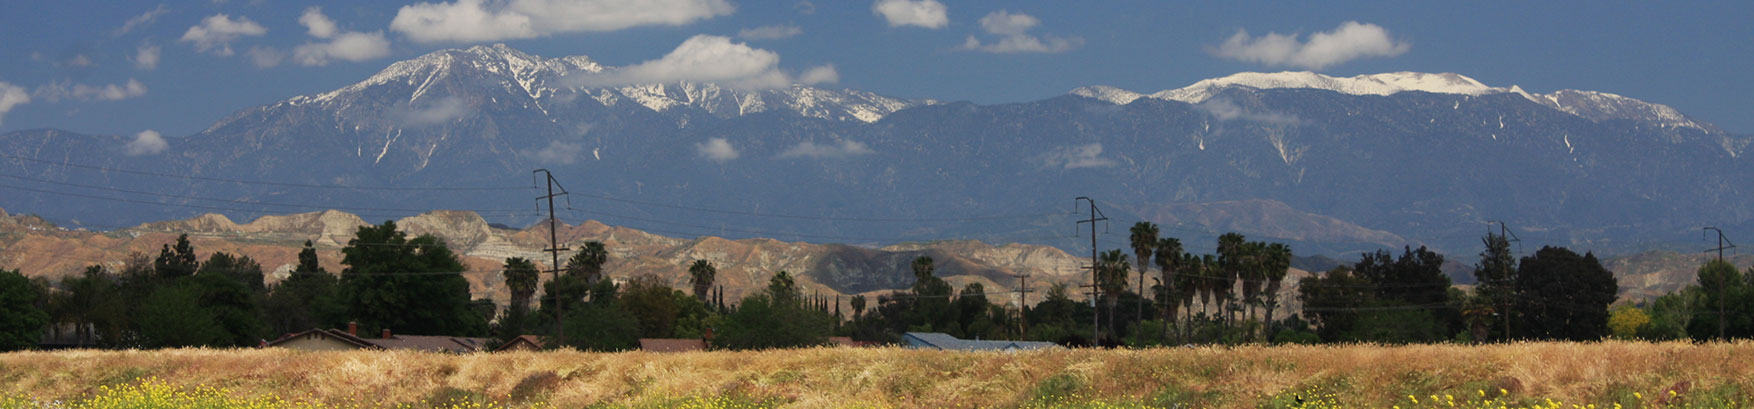 Moreno Valley landscape, an area served by Moreno Valley accident lawyer Super Woman Super Lawyer